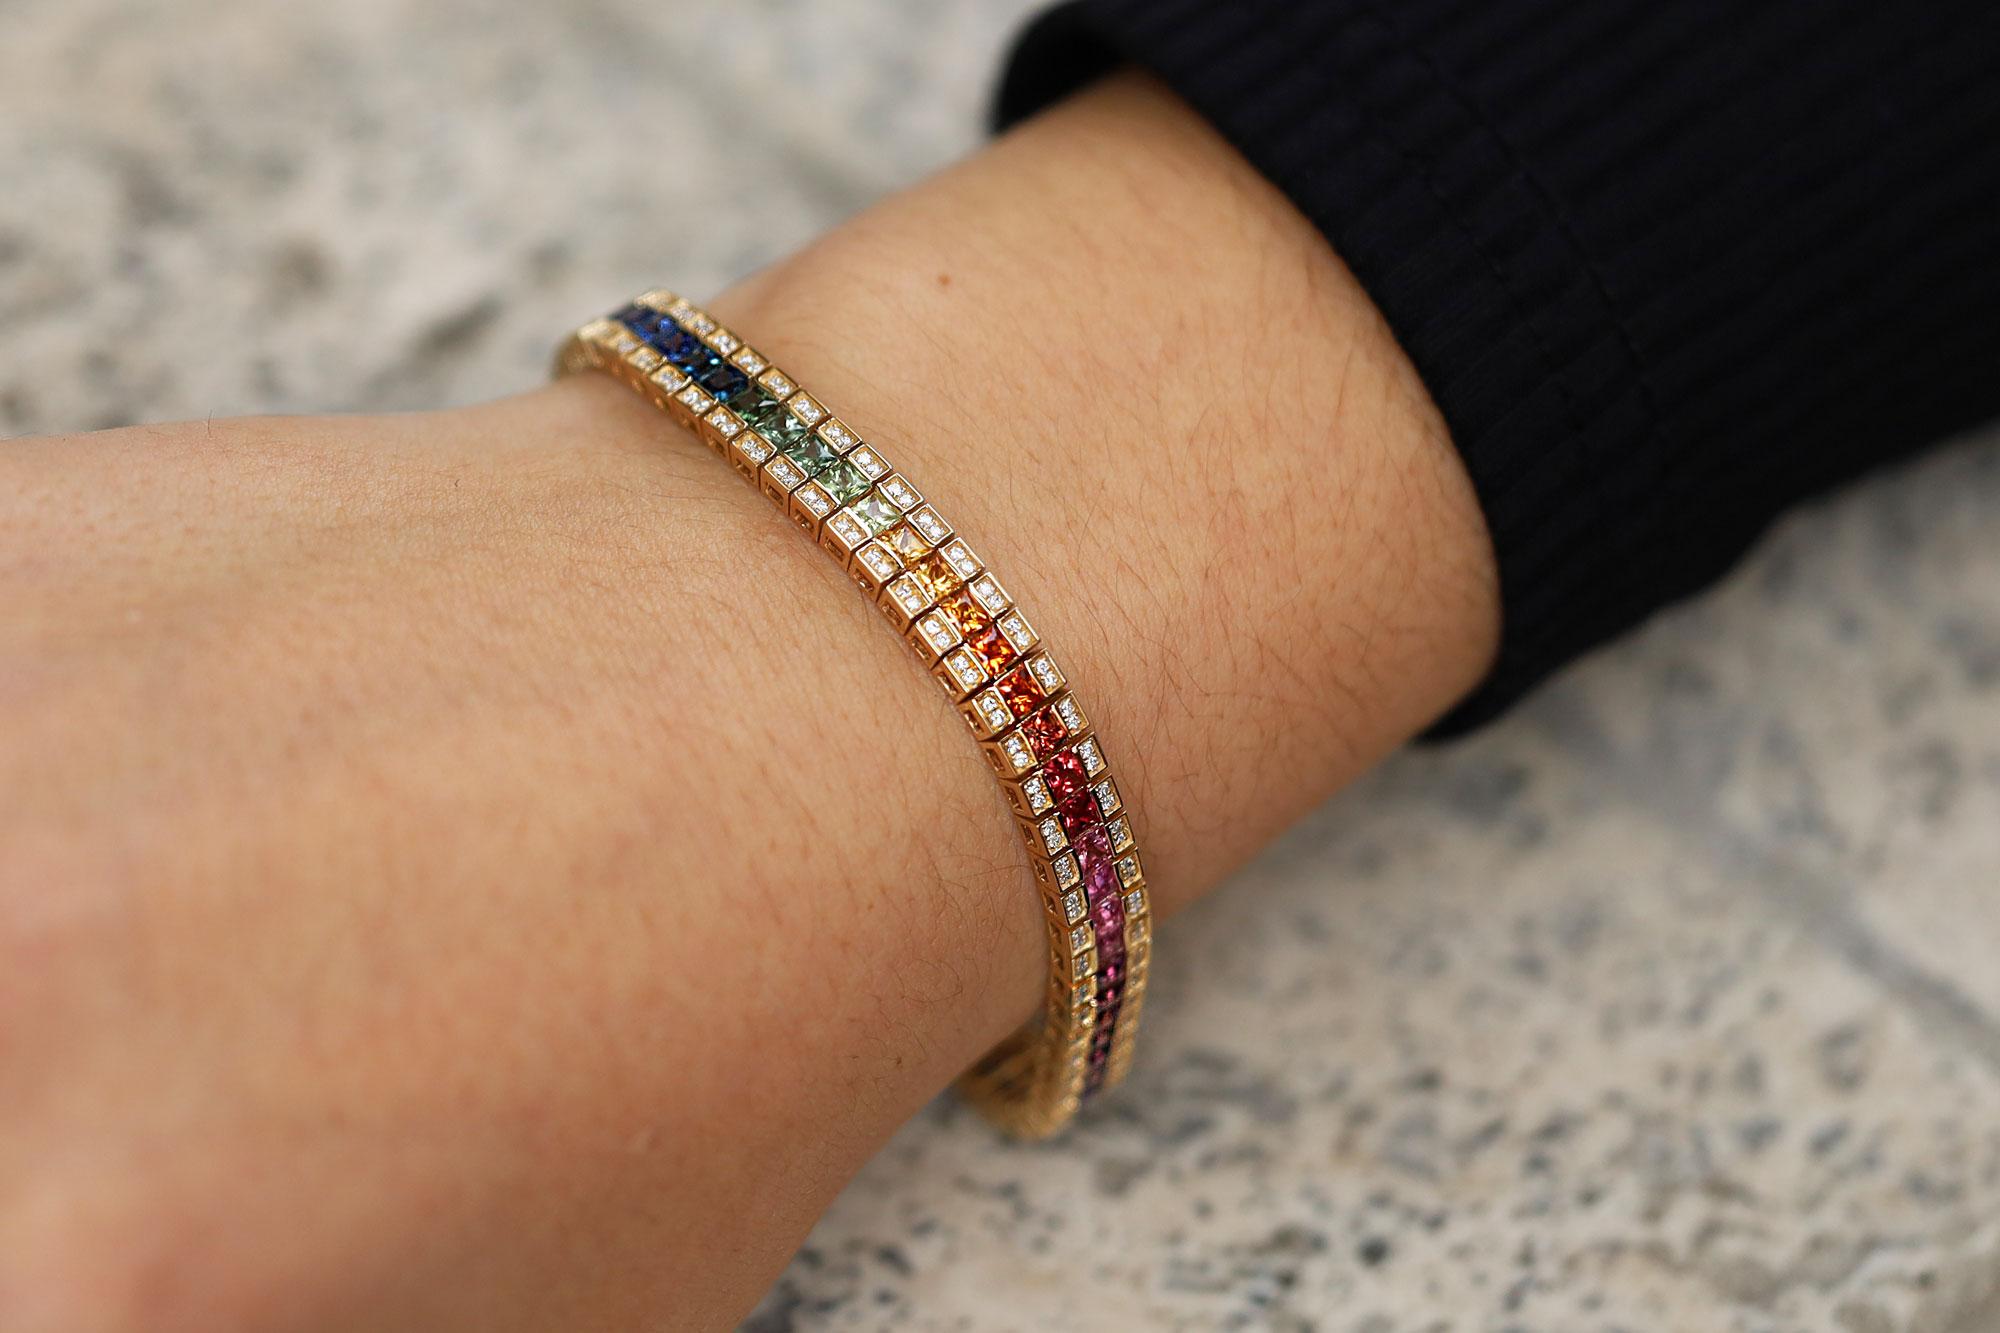 A modern playful twist on the classic line bracelet, 62 princess cut fancy, multi color sapphires with the vivid, bright and deeply saturated gradient colors of a rainbow grace this stunning tennis bracelet. A great stacking piece, but also a